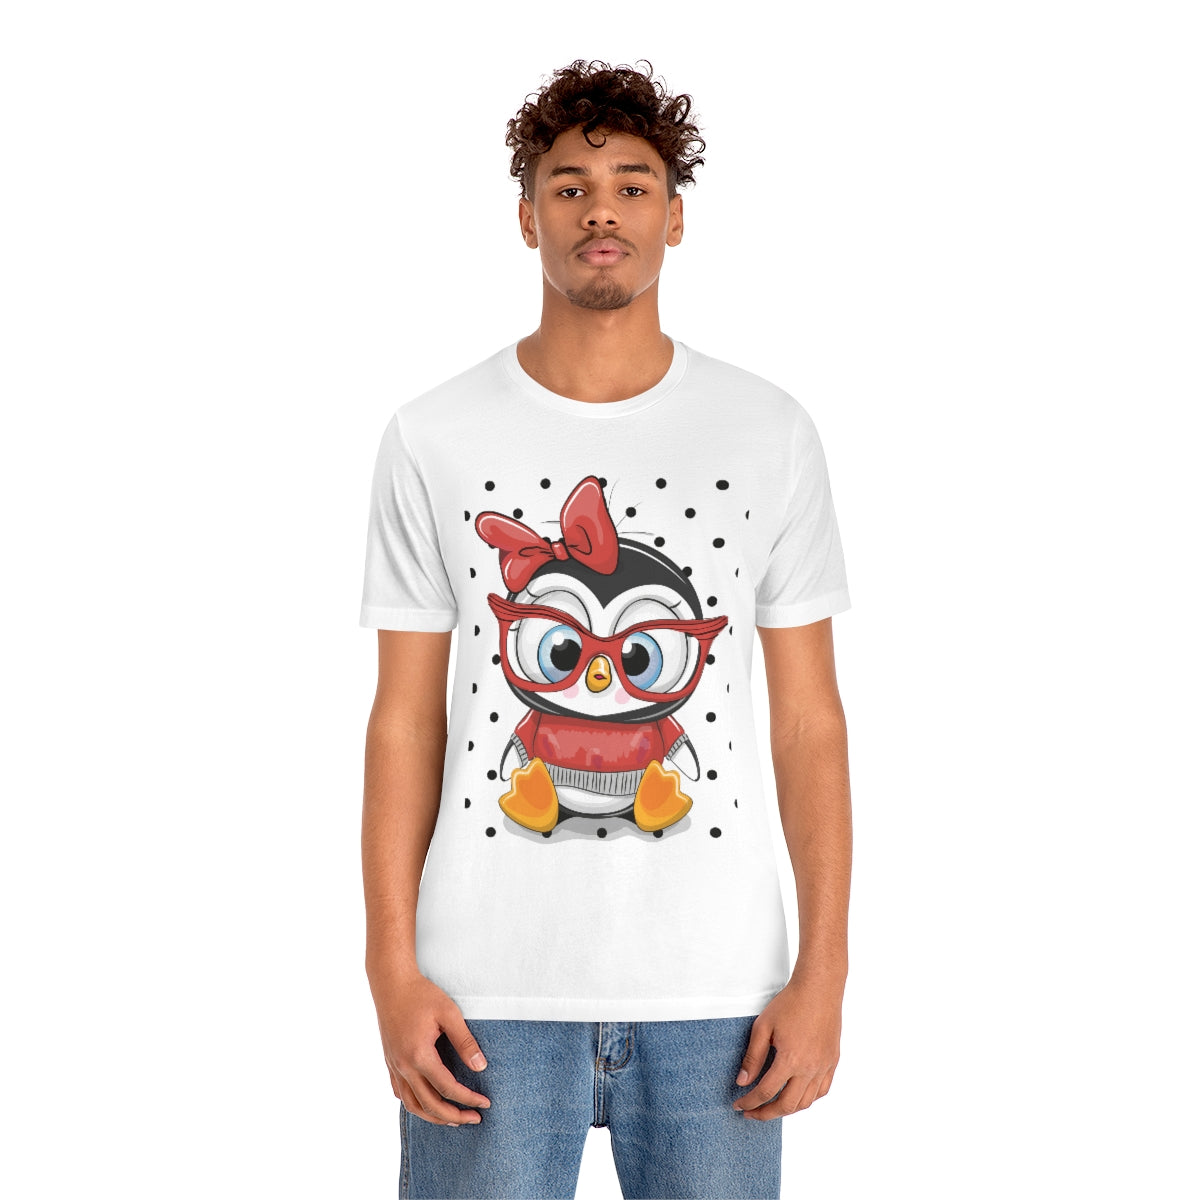 Unisex Jersey Short Sleeve Tee "Cute Cartoon Penguin with red glasses"